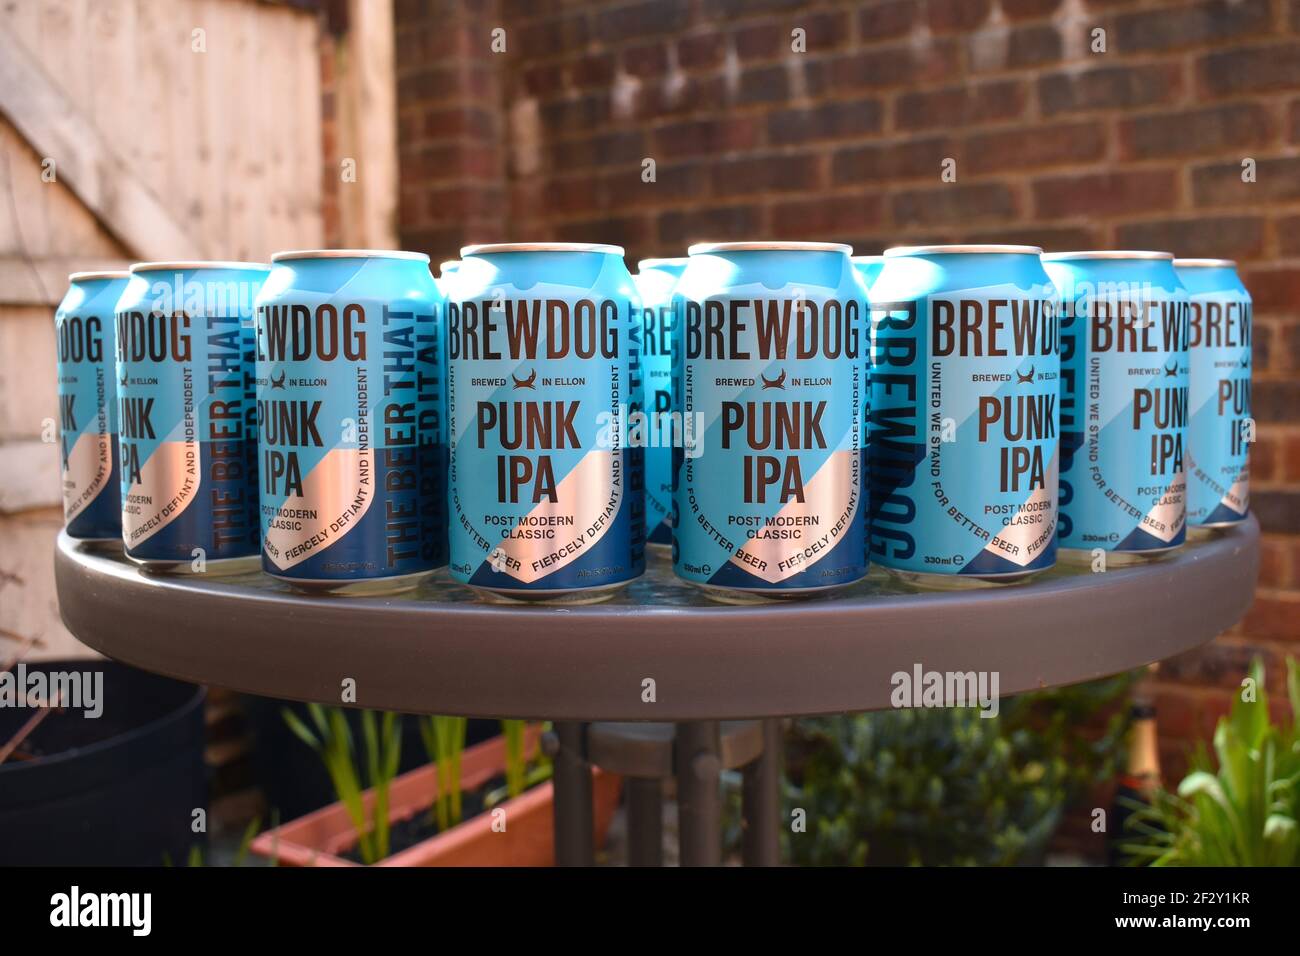 Punk IPA is post modern British classic produced in a brewery in Ellon Scotland This company also started making hand sanitiser to help with shortages Stock Photo